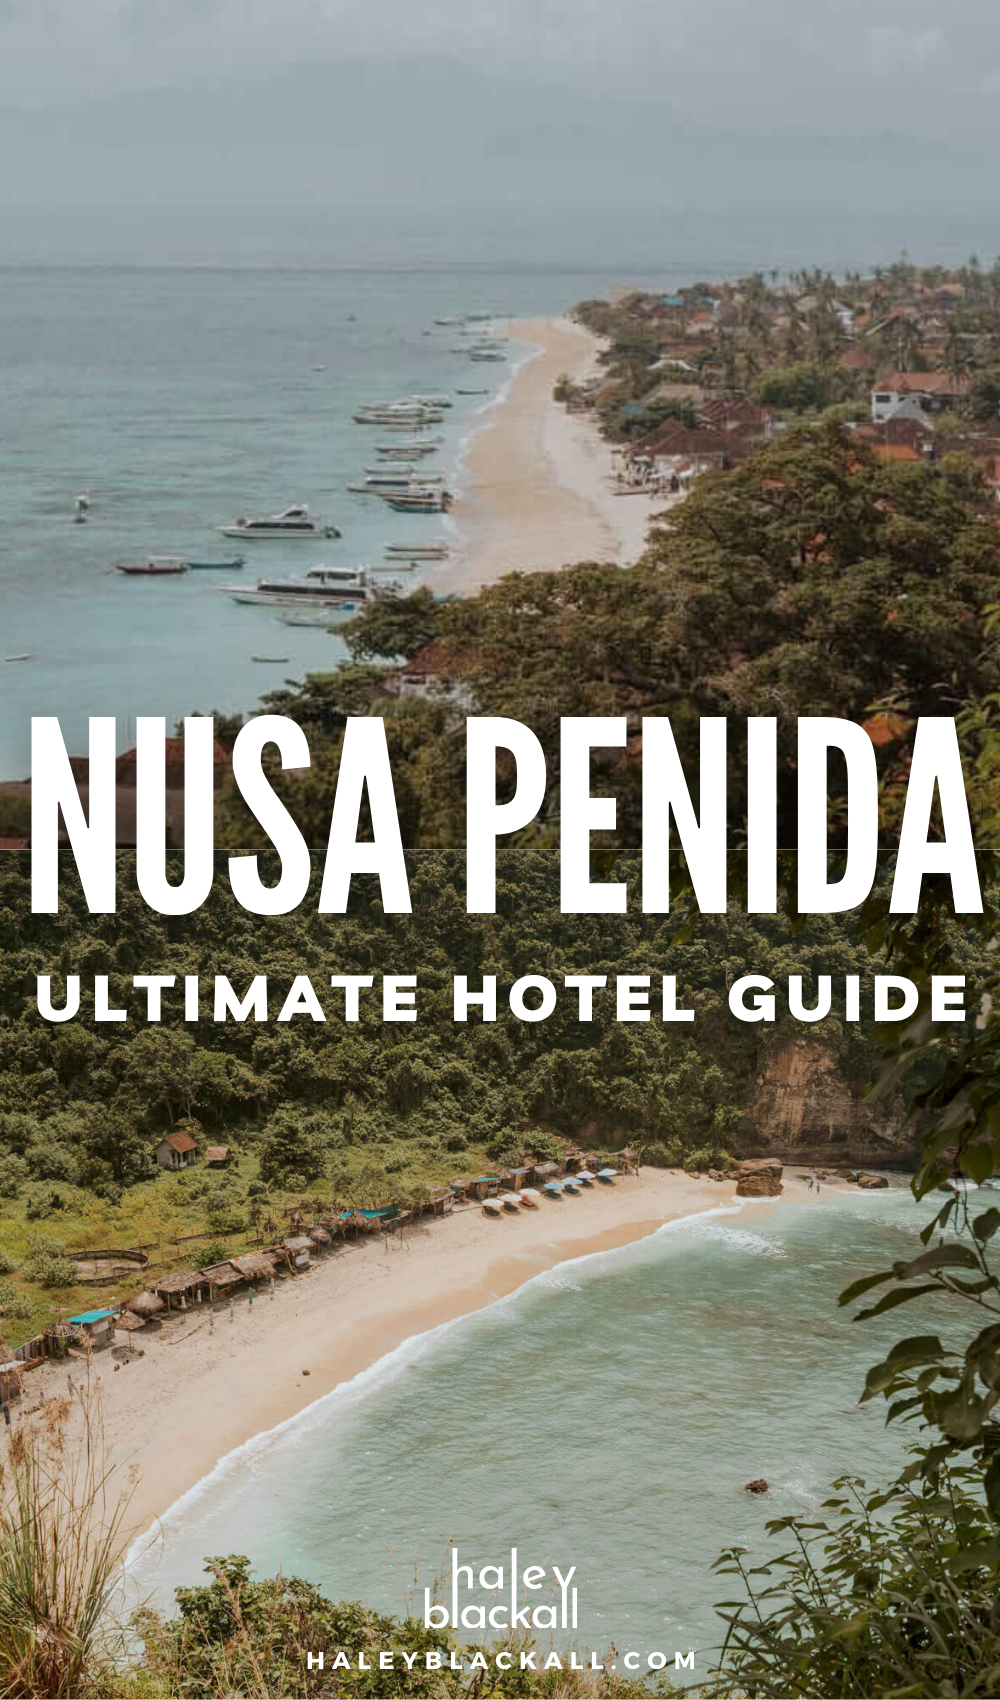 Where to stay in Nusa Penida